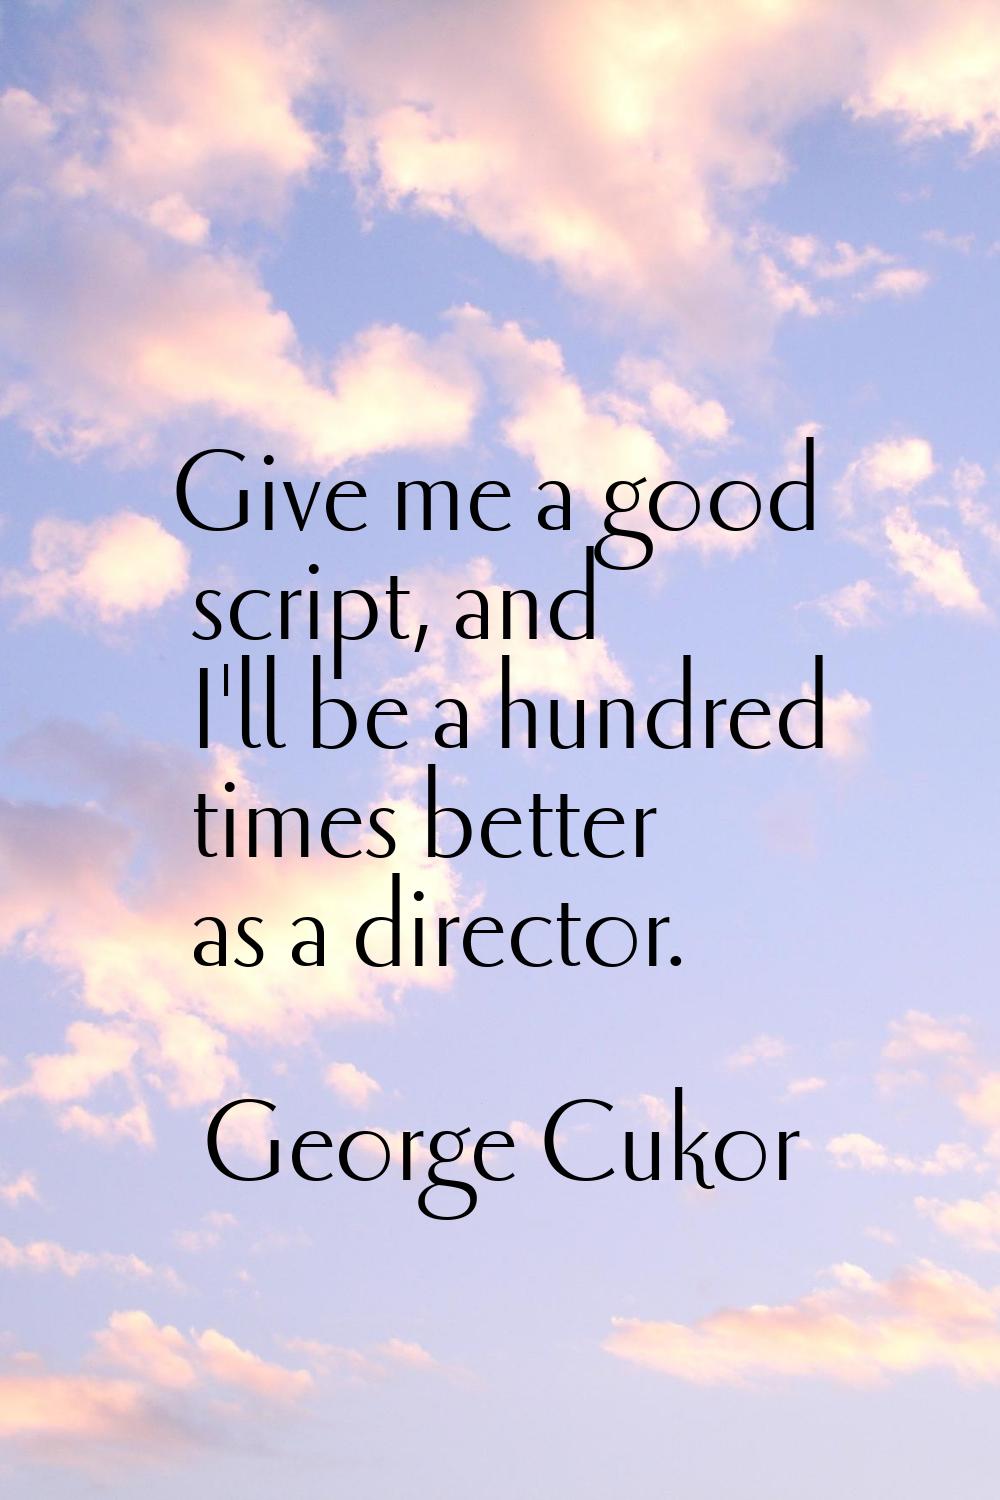 Give me a good script, and I'll be a hundred times better as a director.